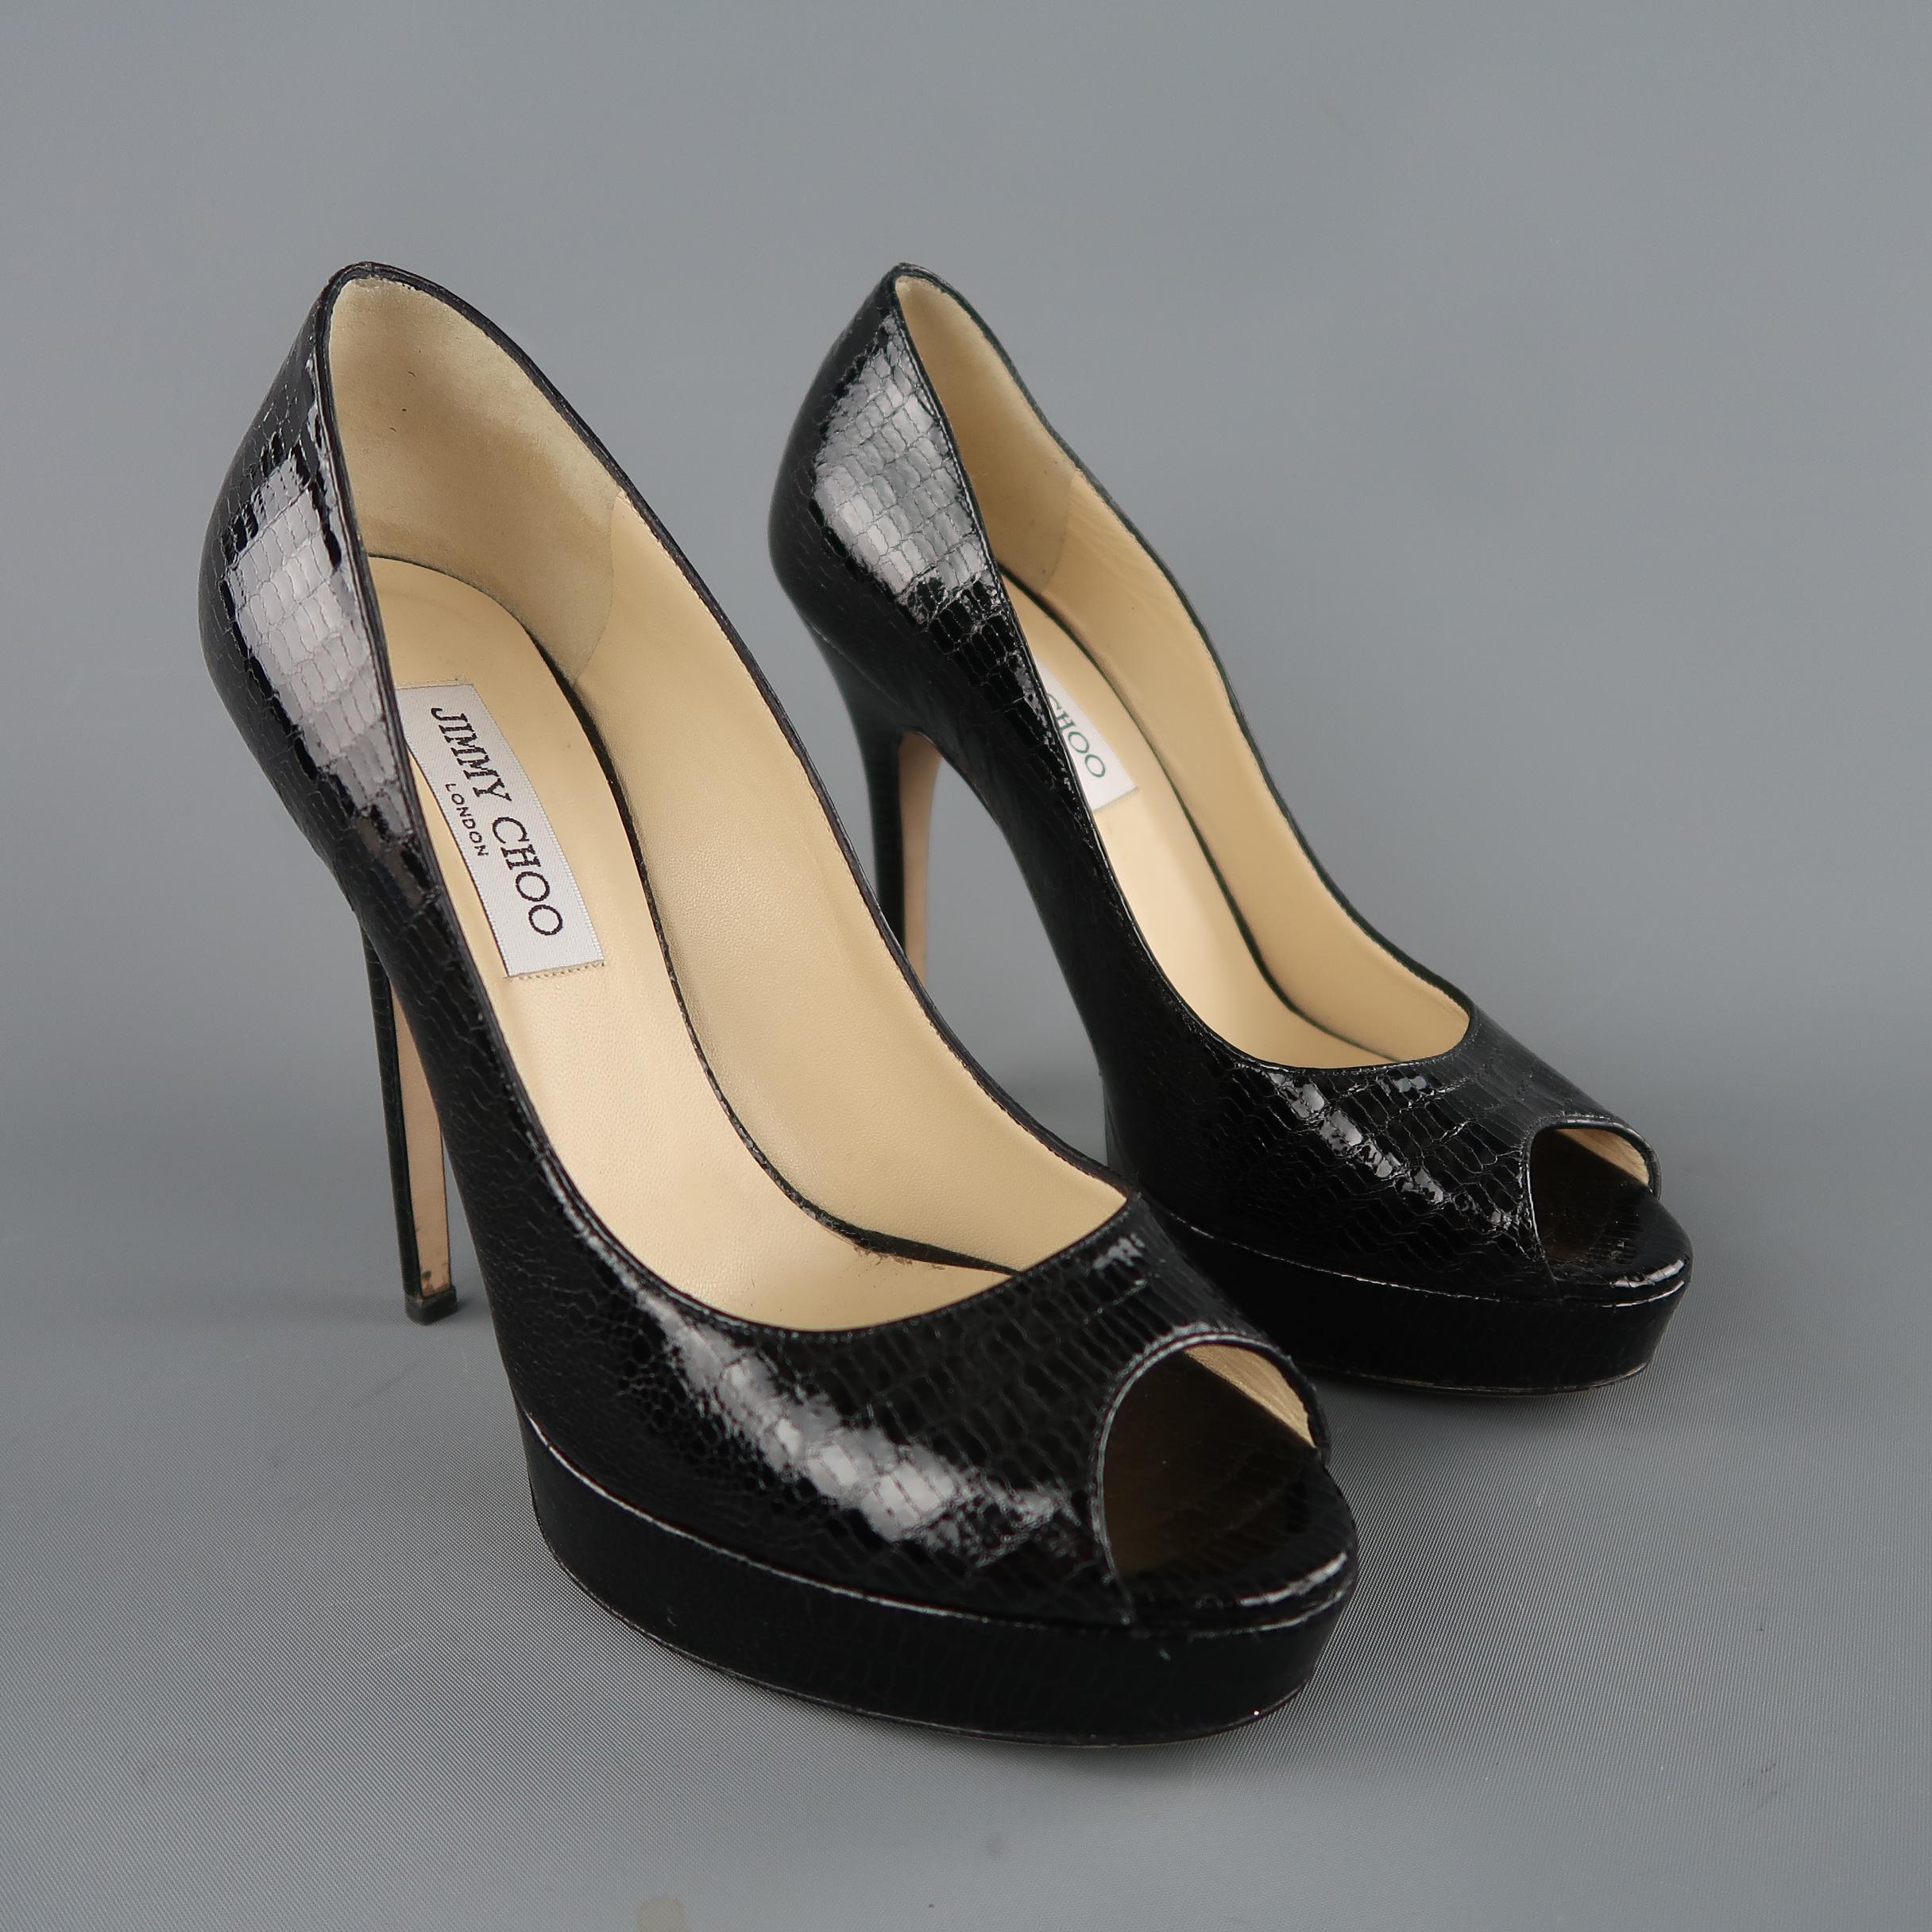 JIMMY CHOO pumps come in shiny lizard embossed leather with a peep toe, covered platform, and covered stiletto heel. Made in Italy.

Original retail price $695.00
 
Excellent Pre-Owned Condition.
Marked: IT 39
 
Measurements:
 
Heel: 5.25